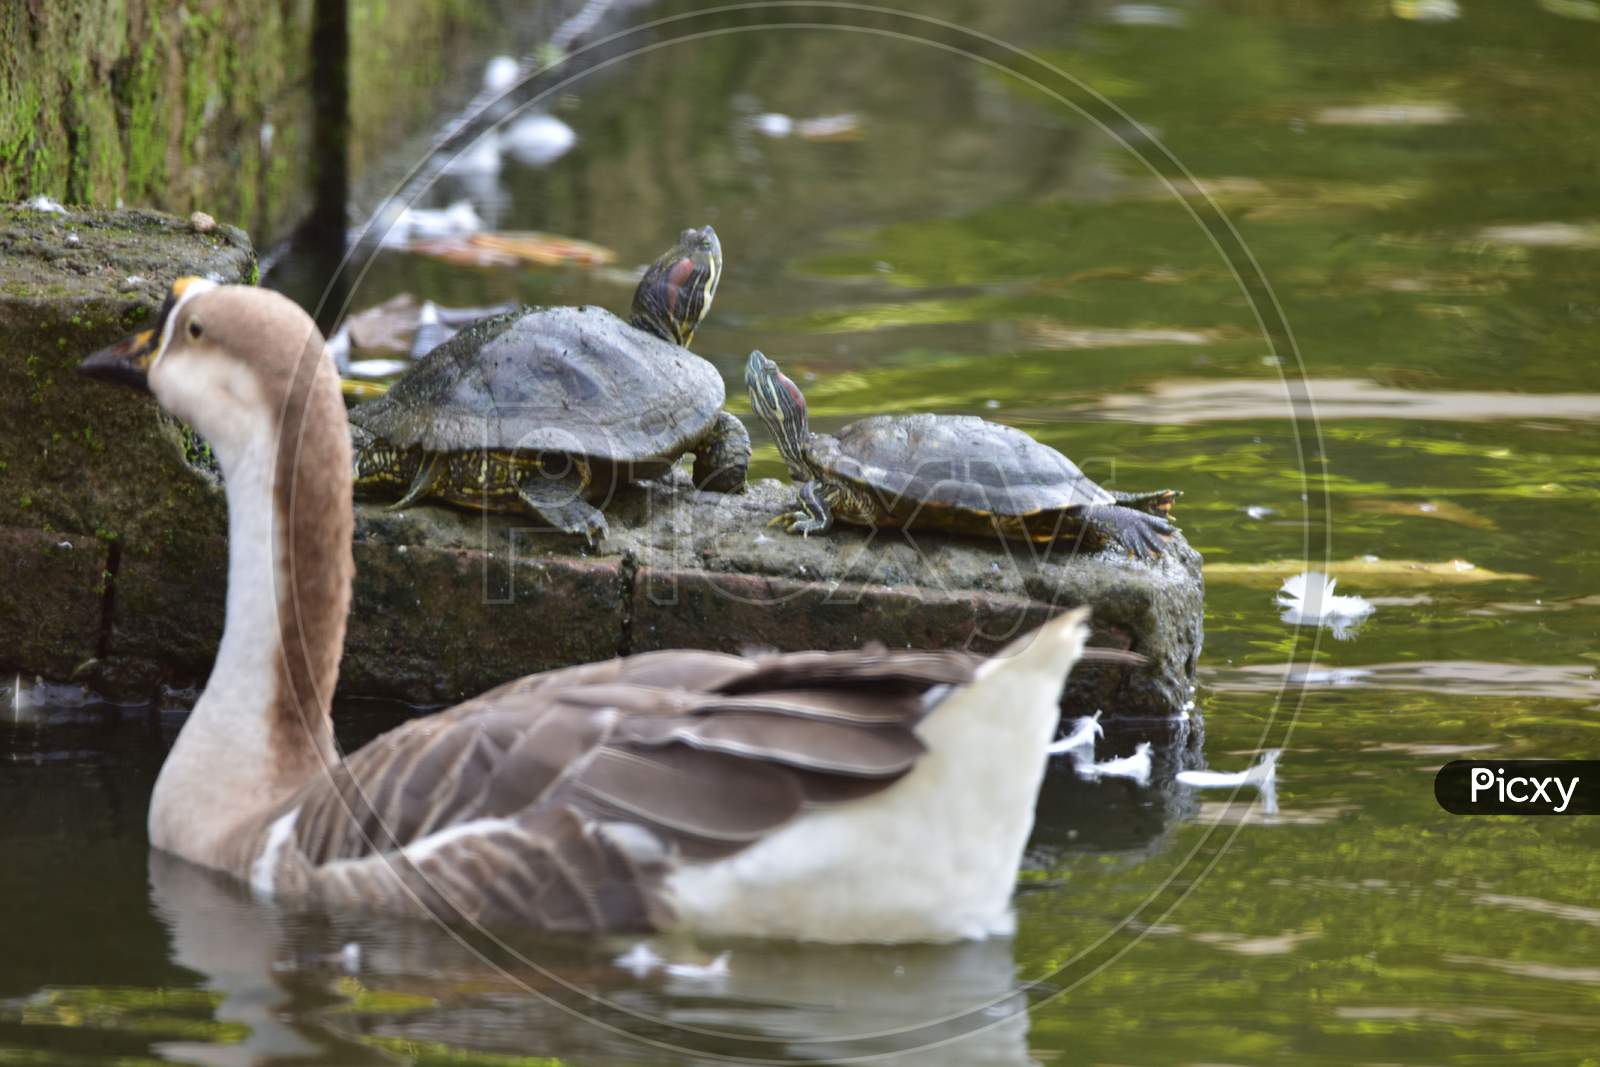 A Geese And A Turtle Near Jorpukhuri Pond On A Hot Summer Day, In Guwahati On Sep 20,2020.